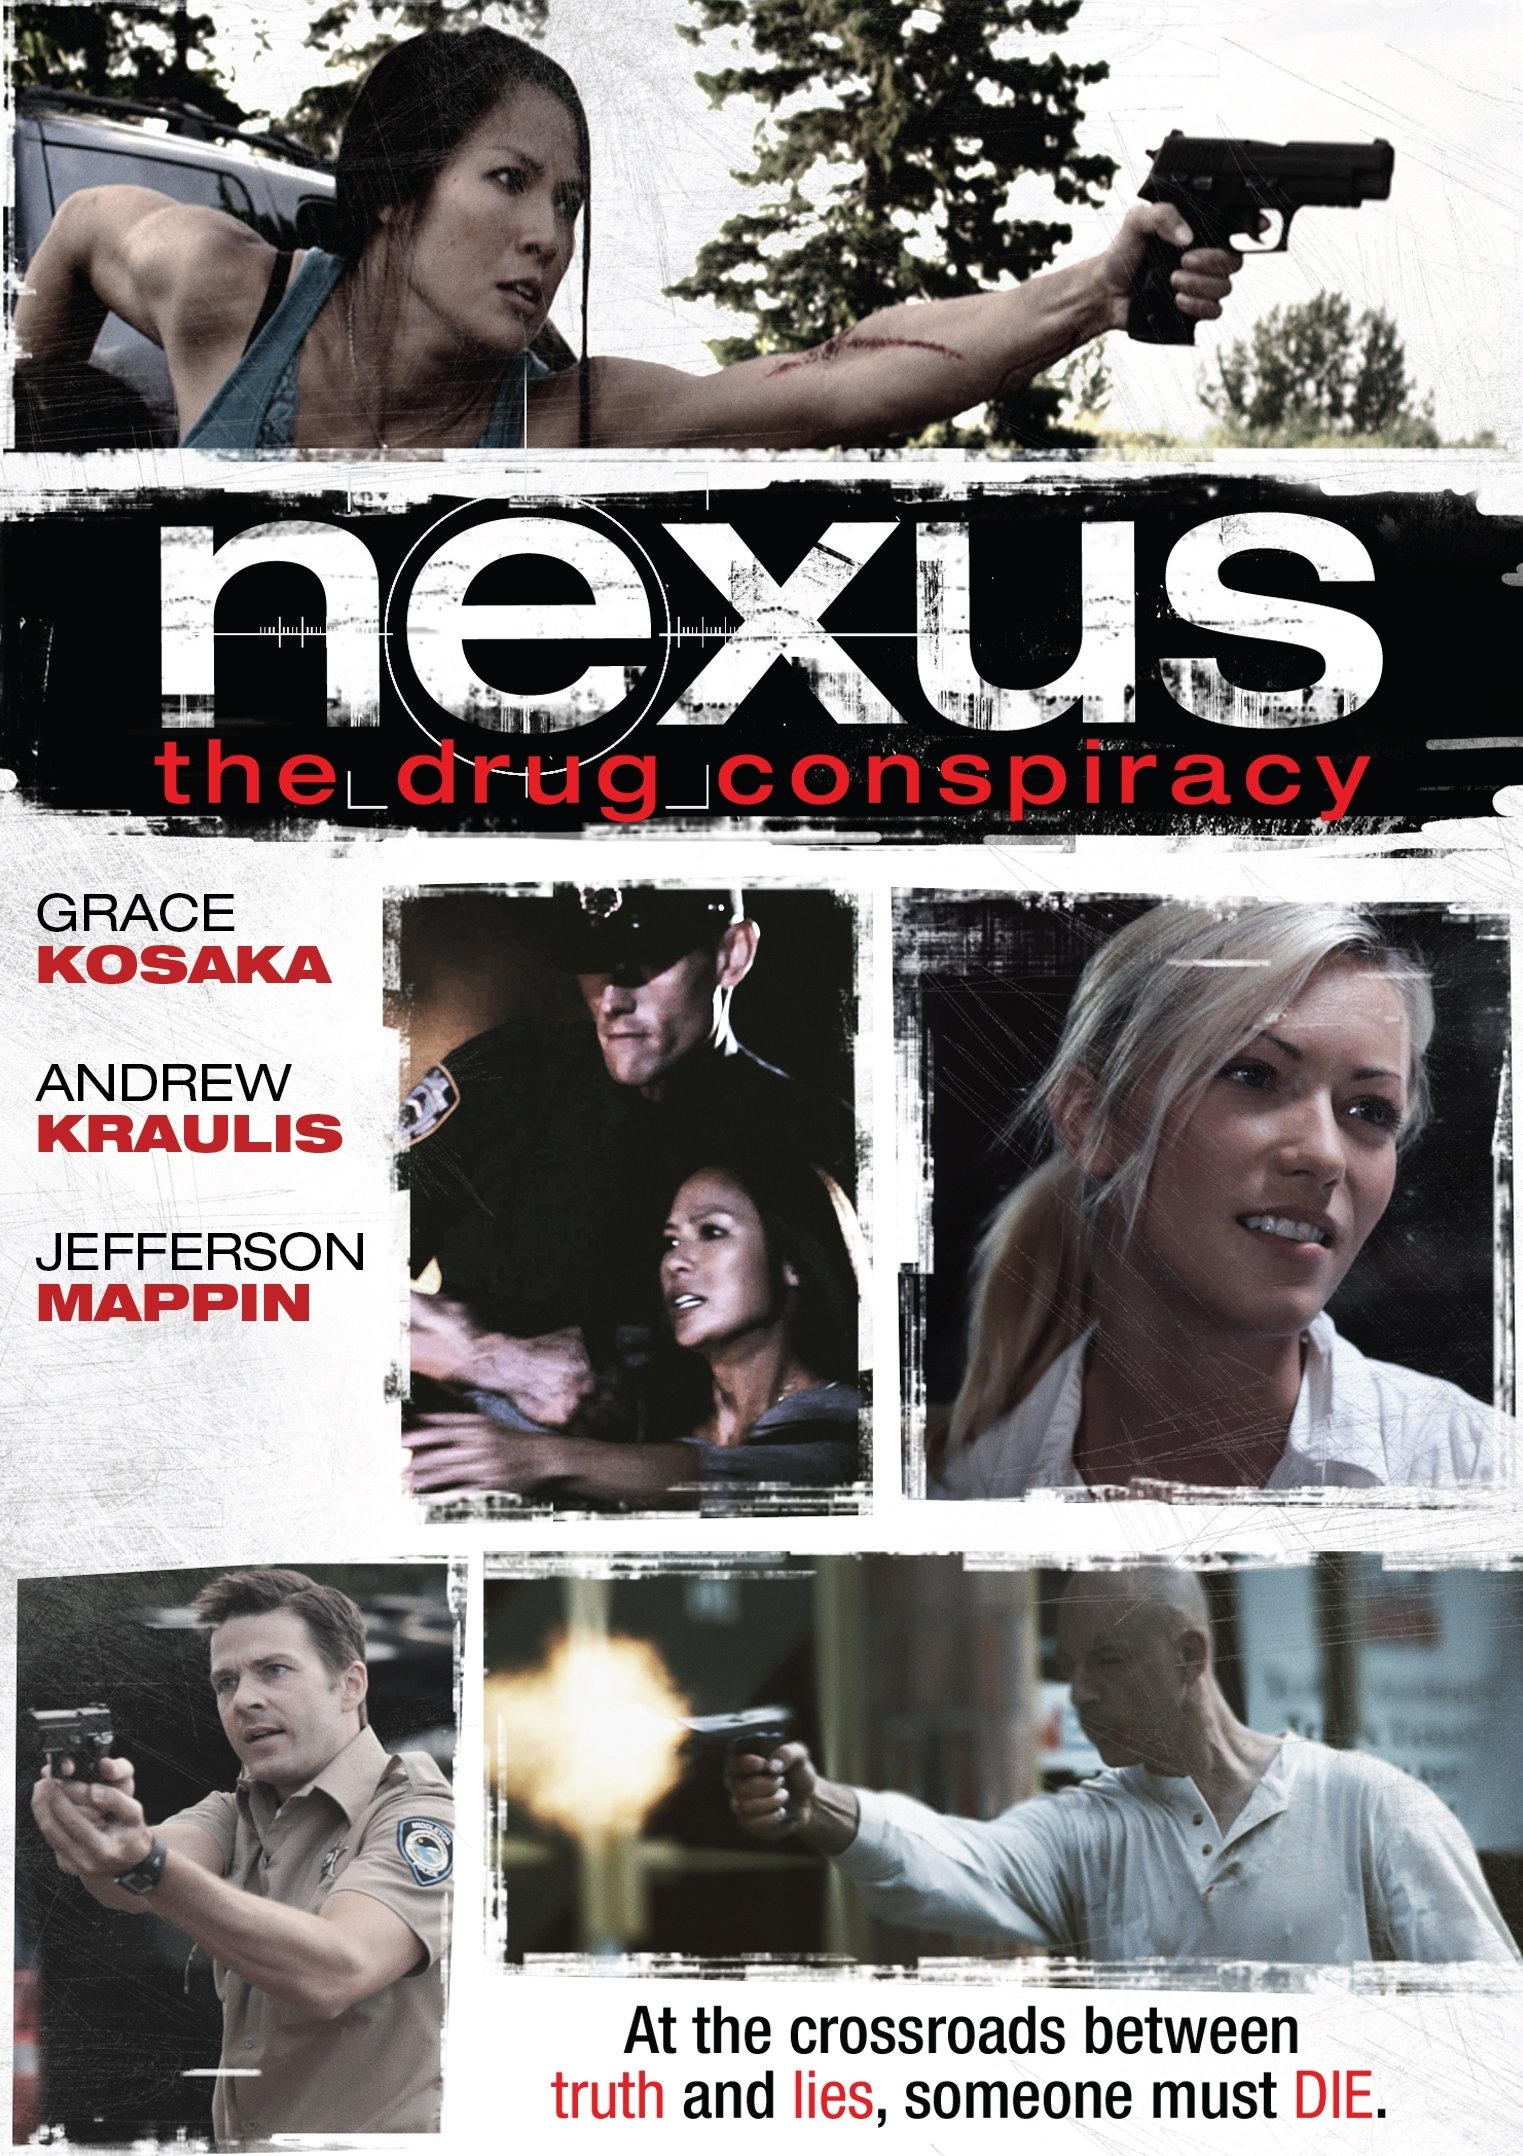 Nexus - feature film DVD Cover. Caged Angel Films, Director Neil Coombs, starring Grace Kosaka, Andrew Kraulis & Jefferson Mappin.